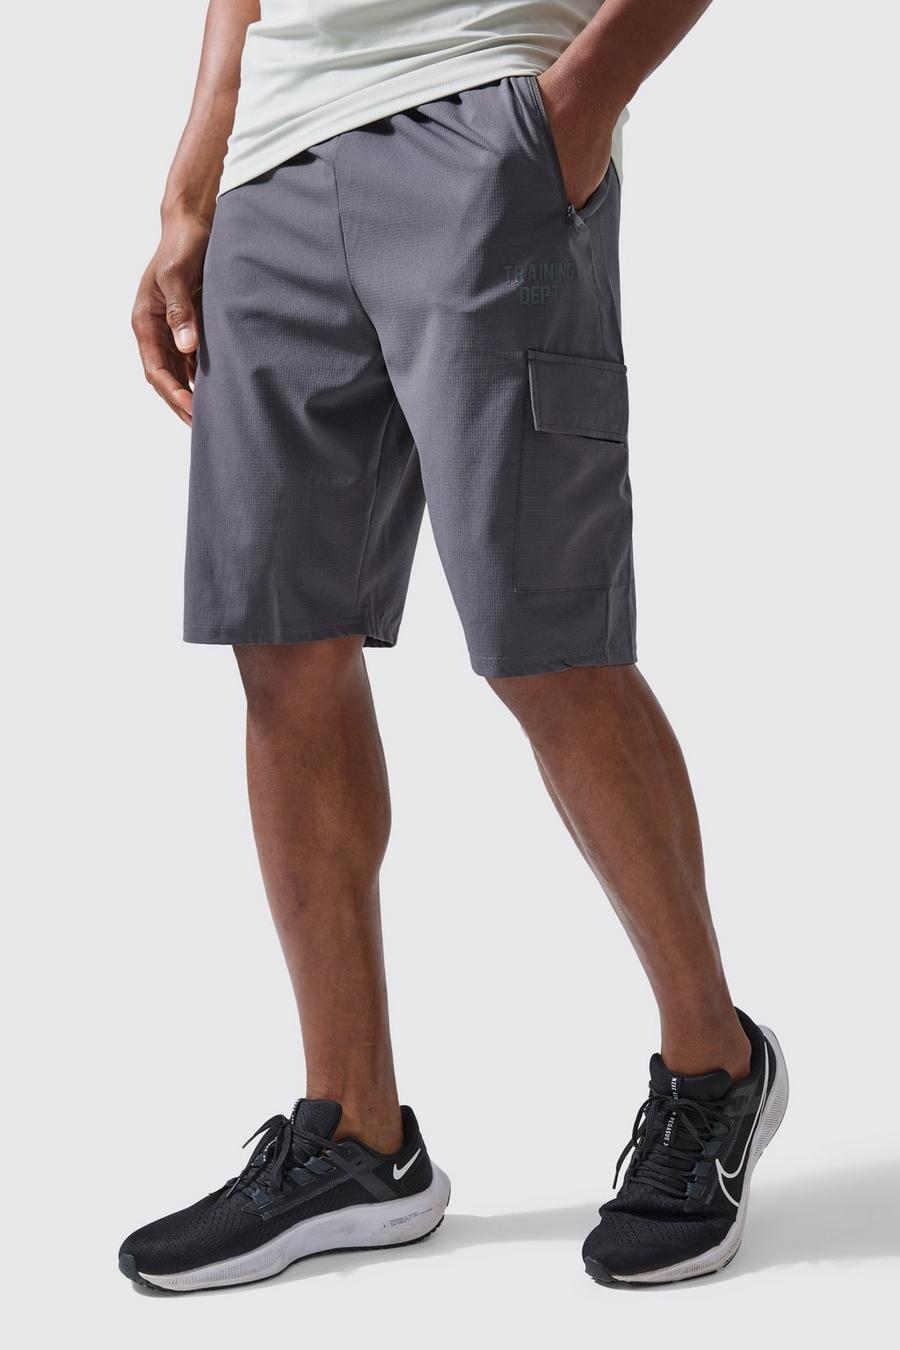 Charcoal gris Tall Active Training Dept Cargo Shorts